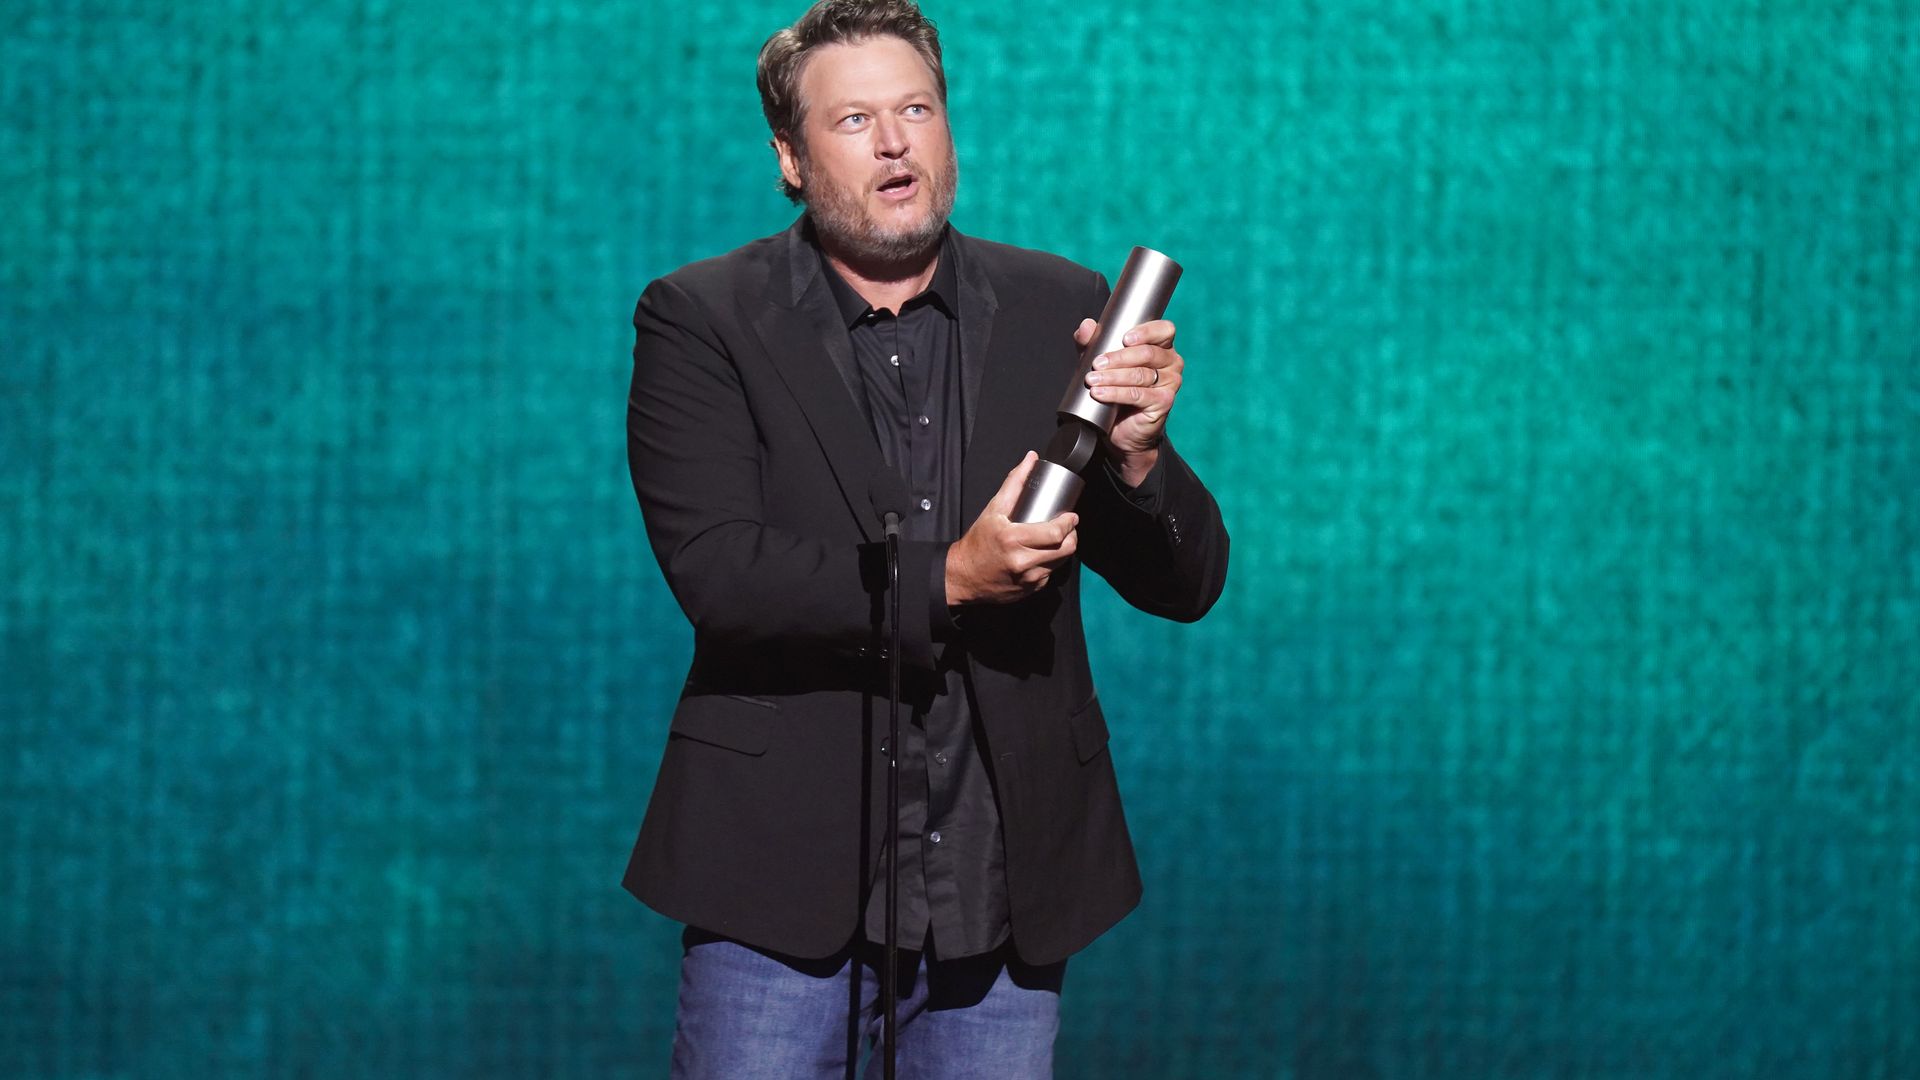 Blake Shelton shares relatable New Years resolution - 'Let's just say I said it'